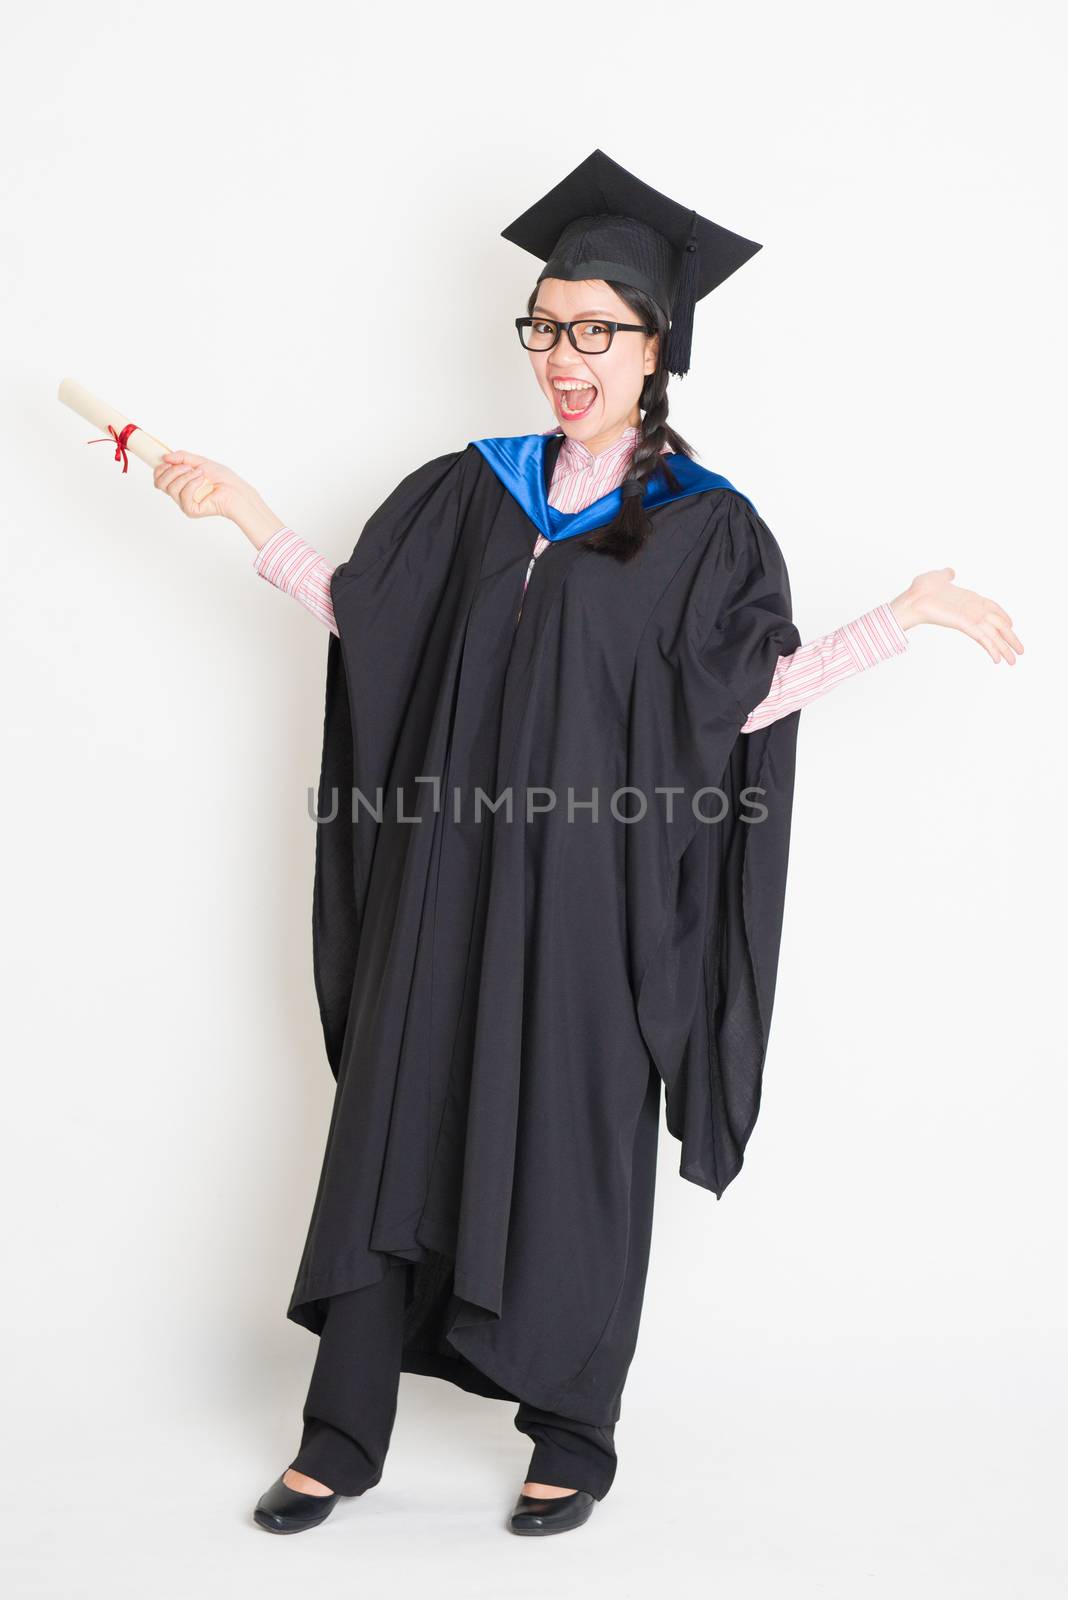 University student in graduation gown and cap holding diploma certificate laughing. Full body portrait of east  Asian female model standing on plain background.